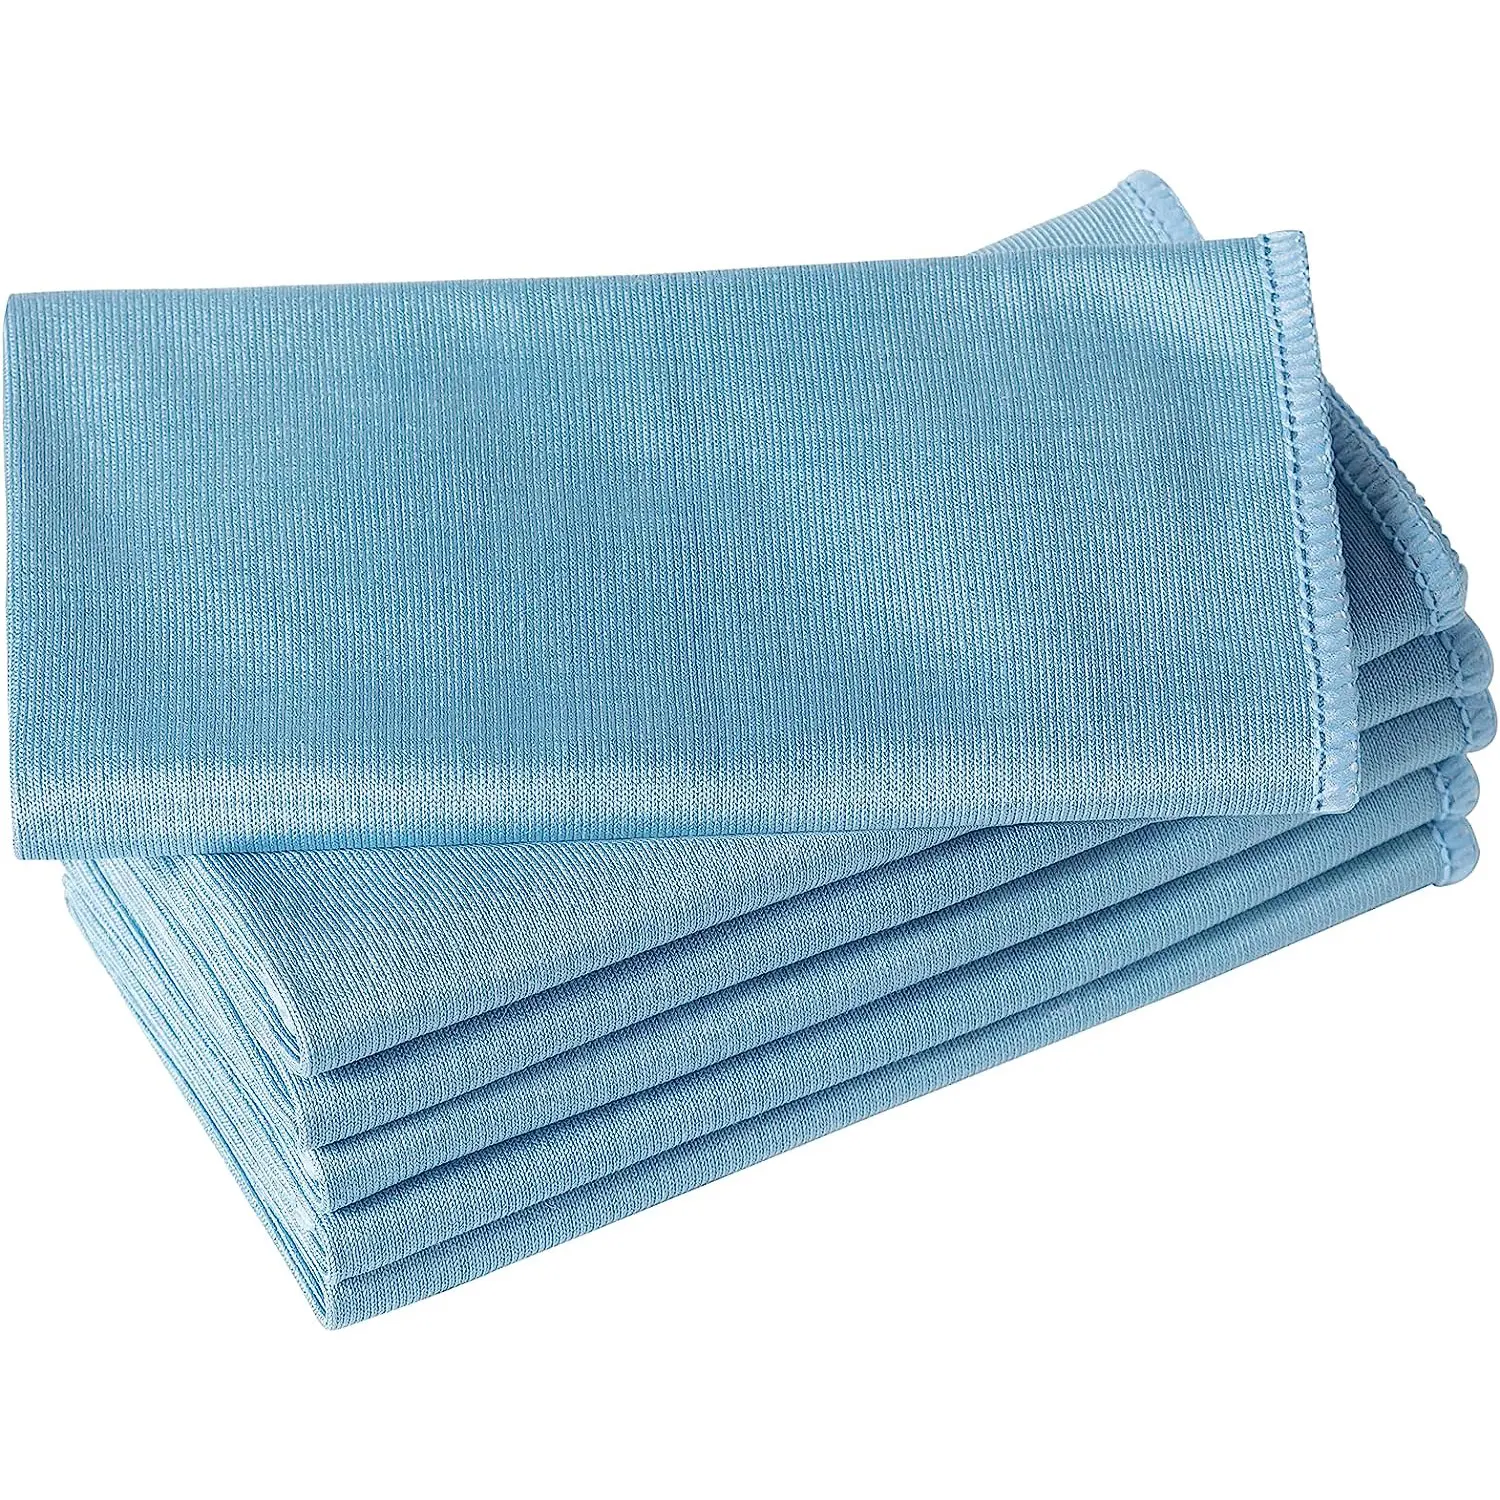 300gsm 40*40cm Lint Free Textured Kitchenware Dish Glass Windows Drying And Cleaning Cloth